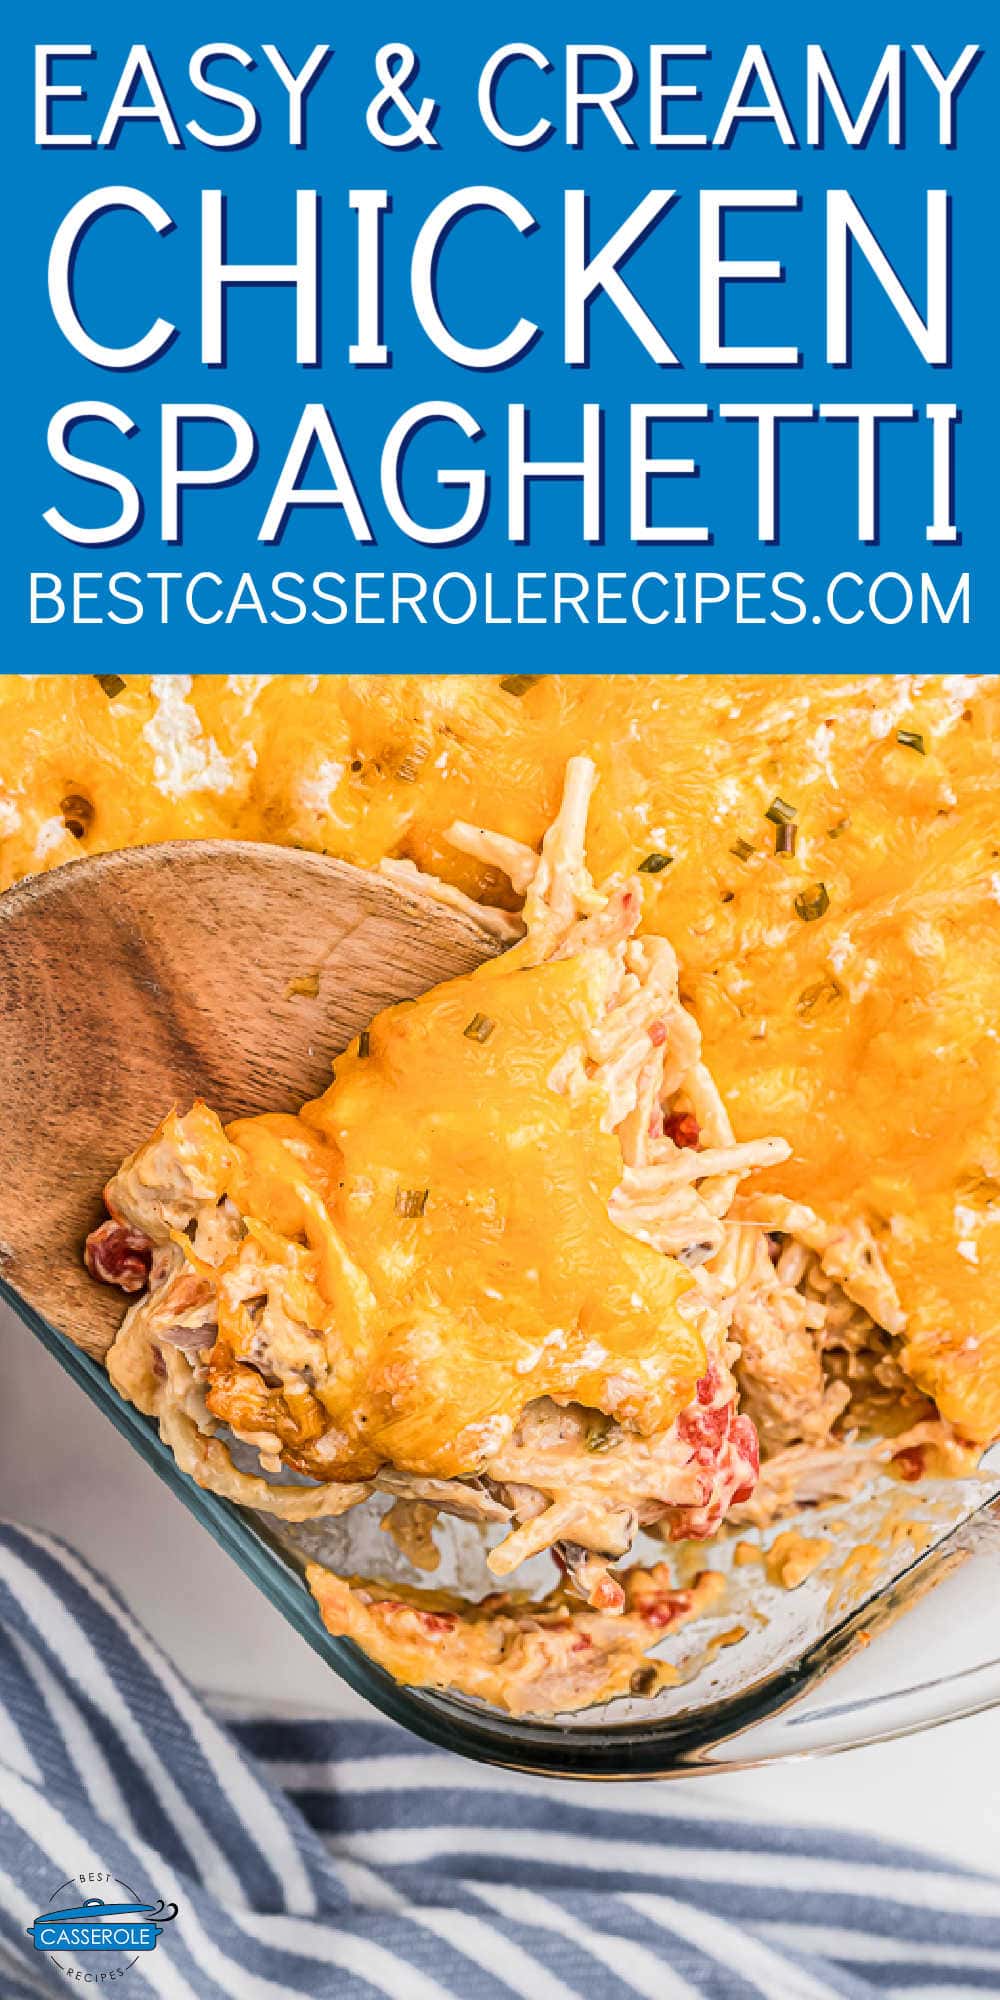 scoop of casserole with blue banner and text "easy & creamy chicken spaghetti"